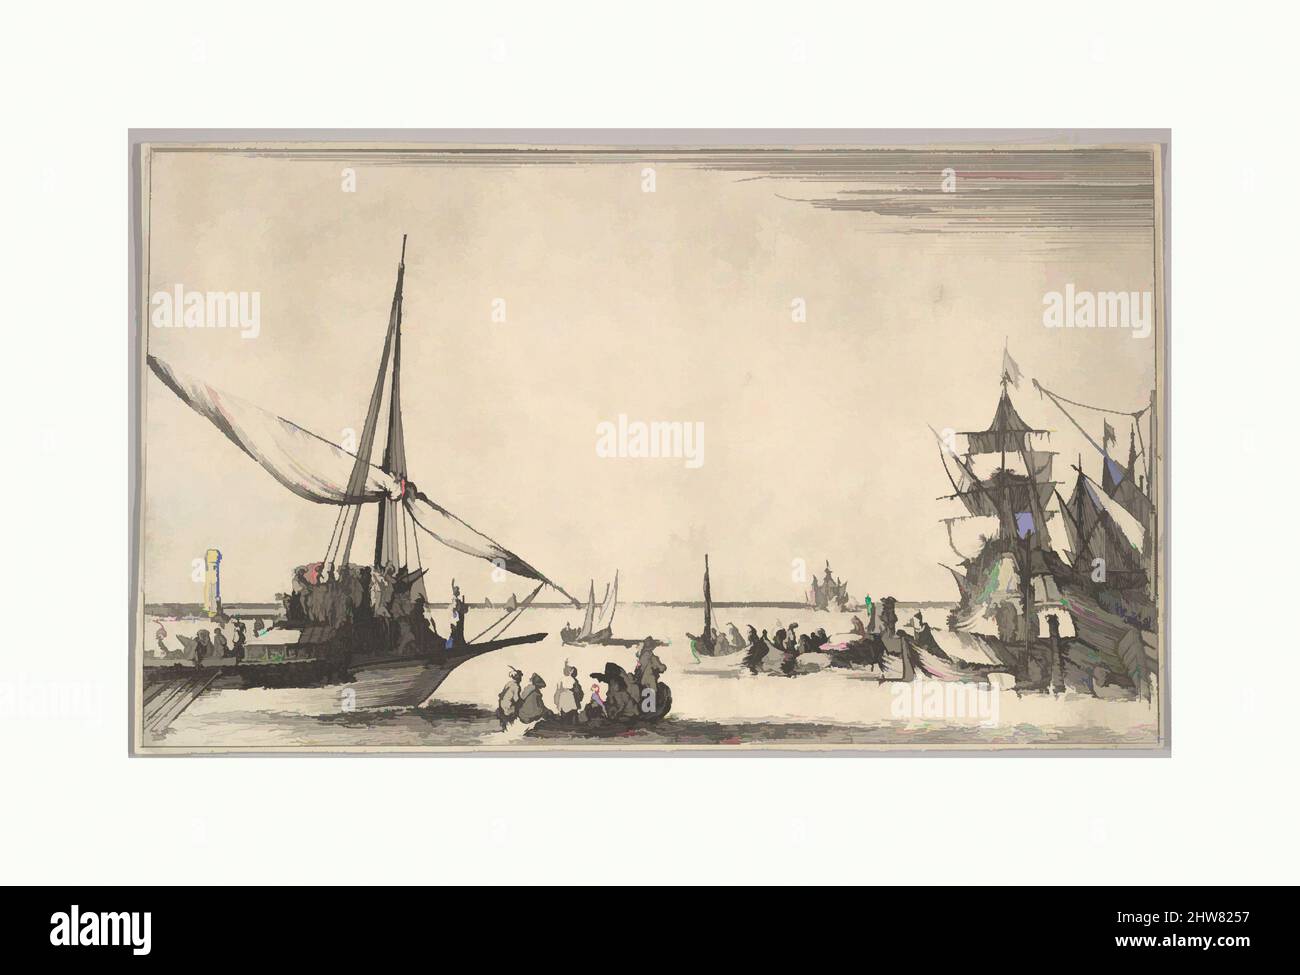 Art inspired by A galley arriving at port to left, several rowboats in center, ships at port to right, from 'Set of eight nautical landscapes' (Suite de huit Marines), 1639, Etching, Sheet: 4 15/16 x 8 1/4 in. (12.5 x 21 cm), Prints, Stefano della Bella (Italian, Florence 1610–1664, Classic works modernized by Artotop with a splash of modernity. Shapes, color and value, eye-catching visual impact on art. Emotions through freedom of artworks in a contemporary way. A timeless message pursuing a wildly creative new direction. Artists turning to the digital medium and creating the Artotop NFT Stock Photo